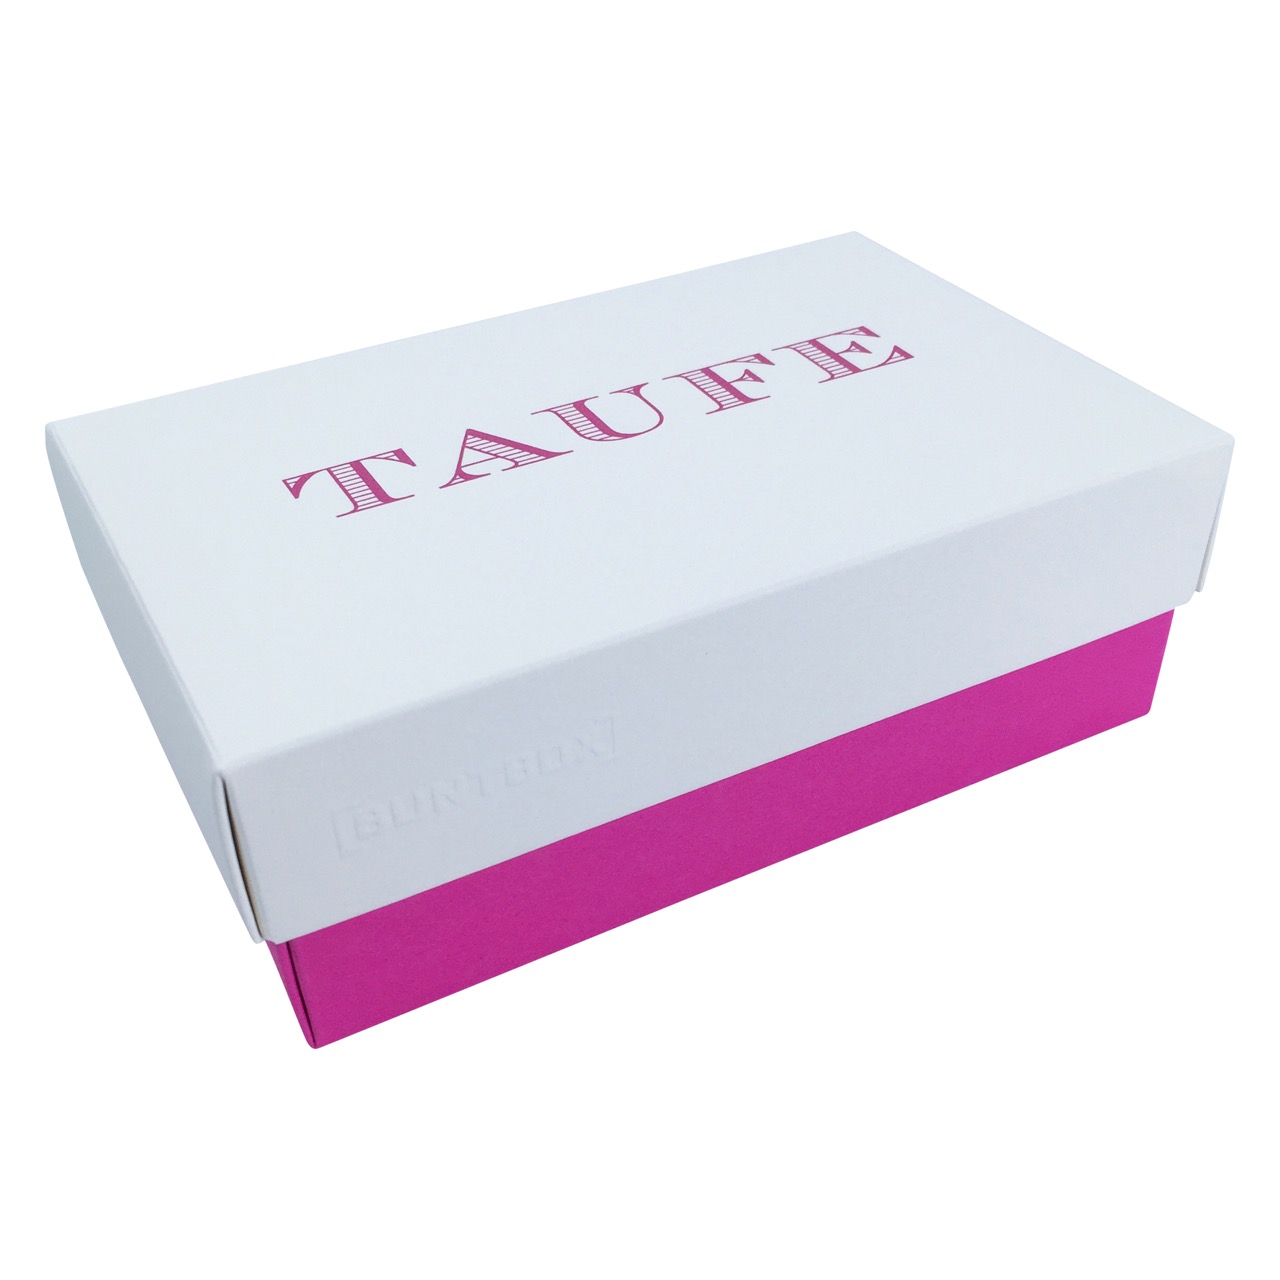 Fine Paper Edition Buntbox Champagner - Bordeaux 'Taufe' - Rot